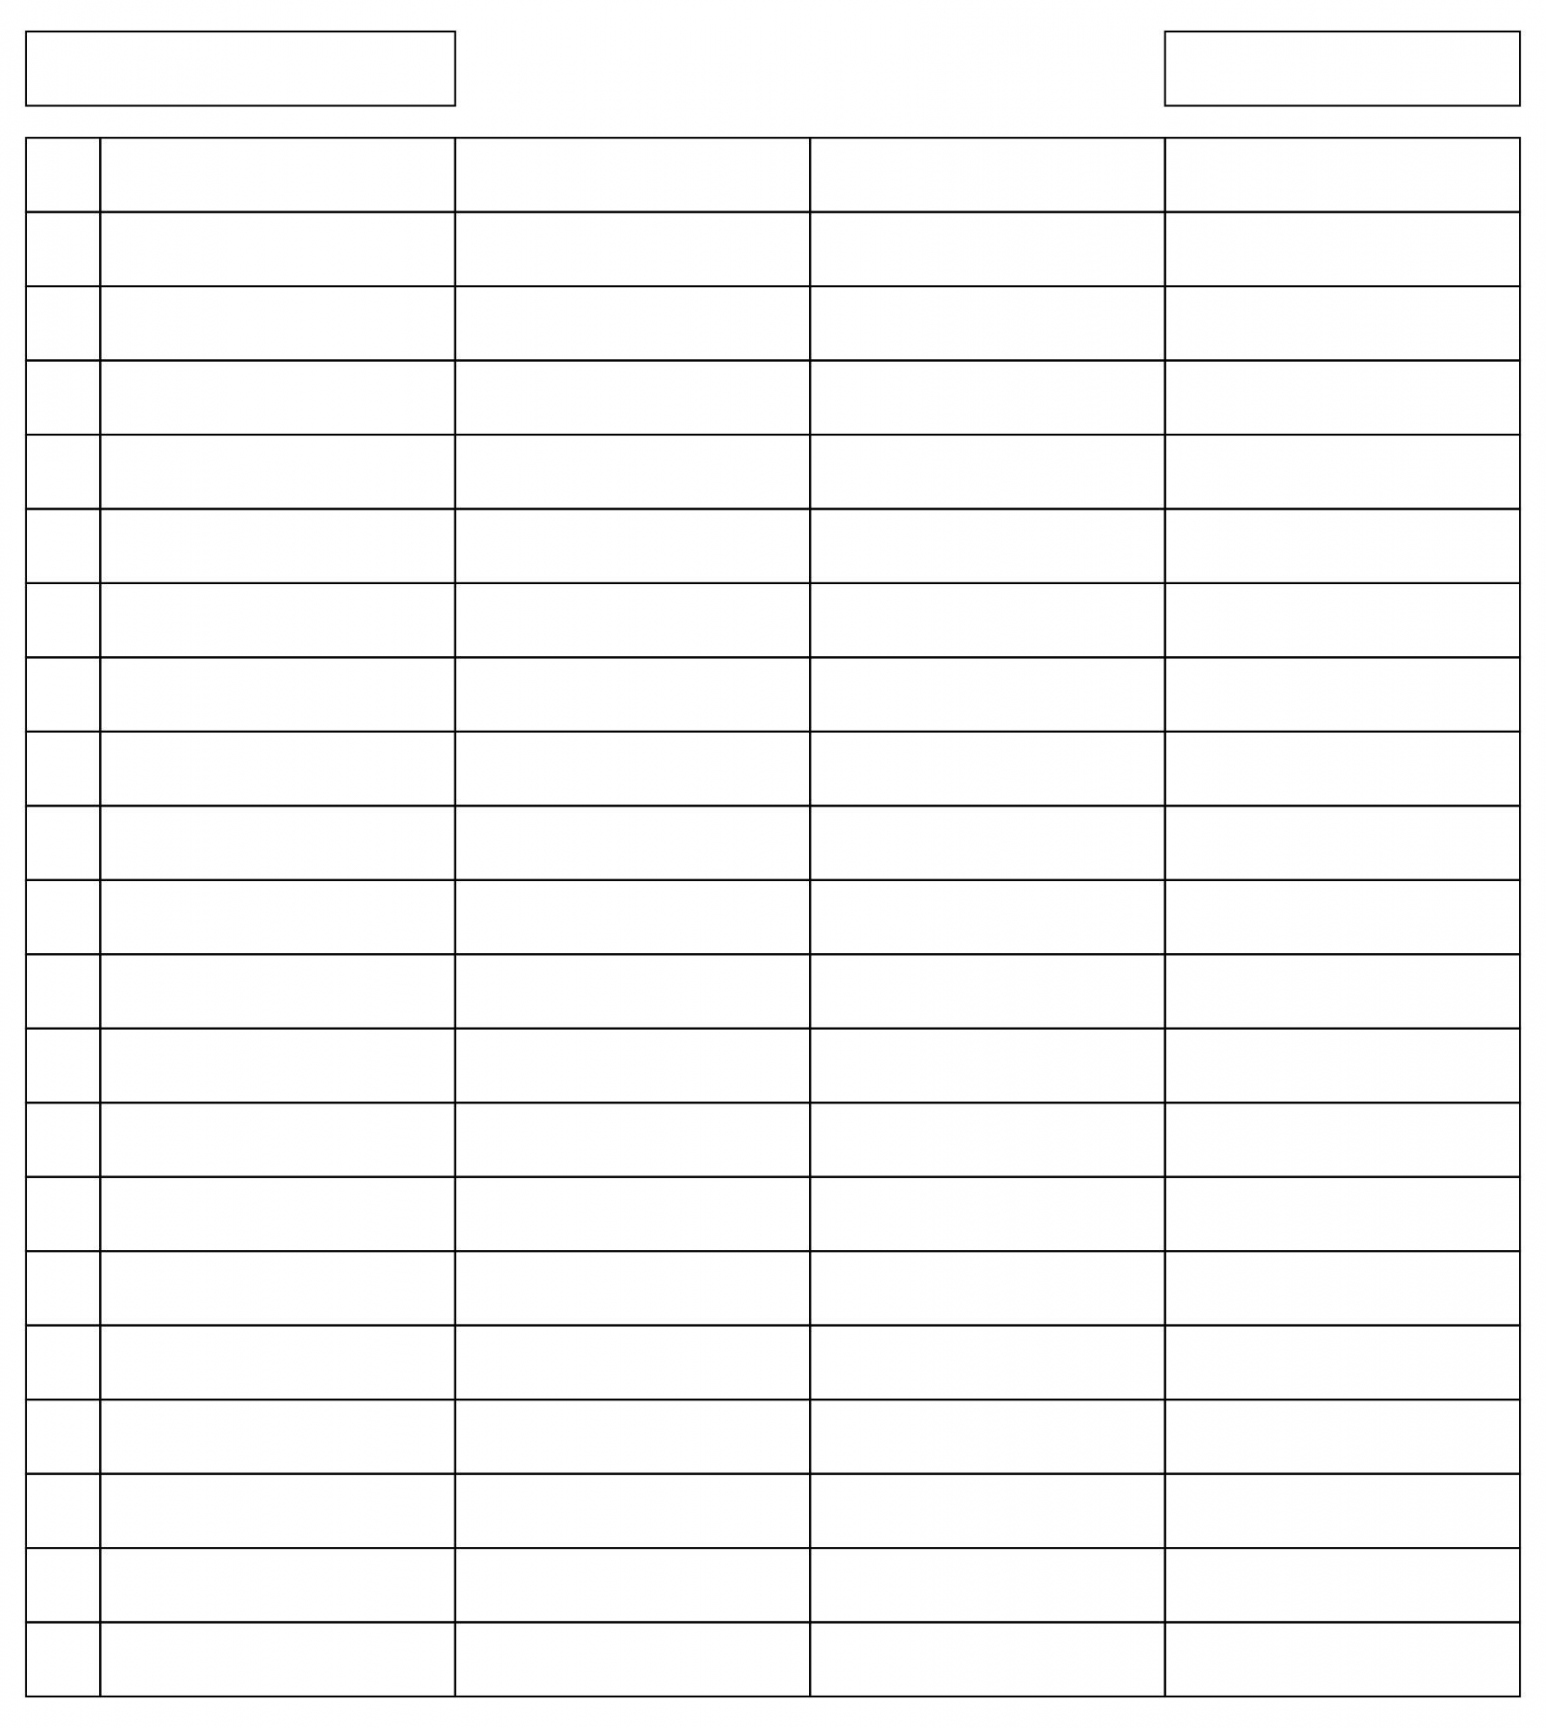 Printable  Column Chart Template  Table of contents template  - FREE Printables - 5 Columns